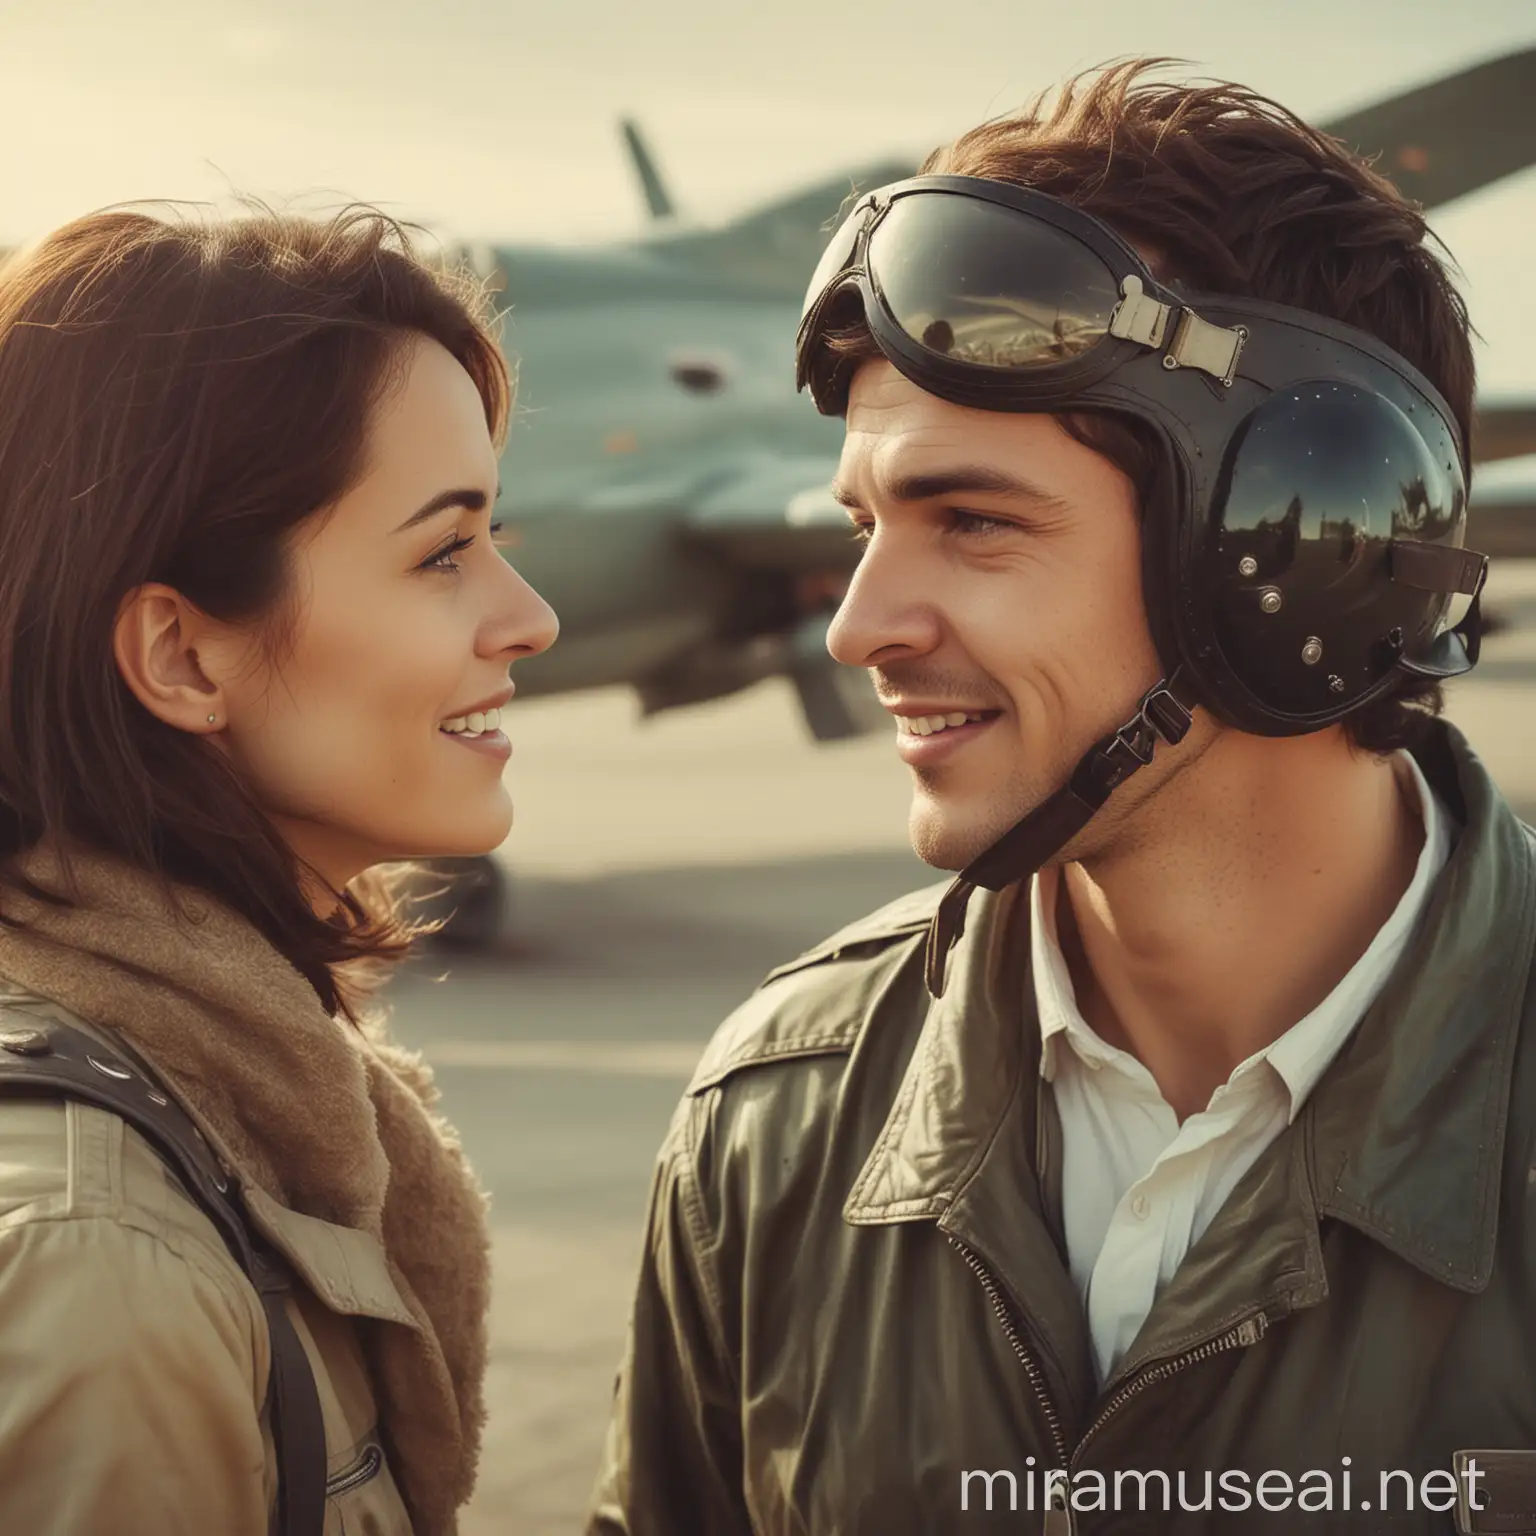 Vintage Airport Encounter Respectful Woman and Fighter Pilot